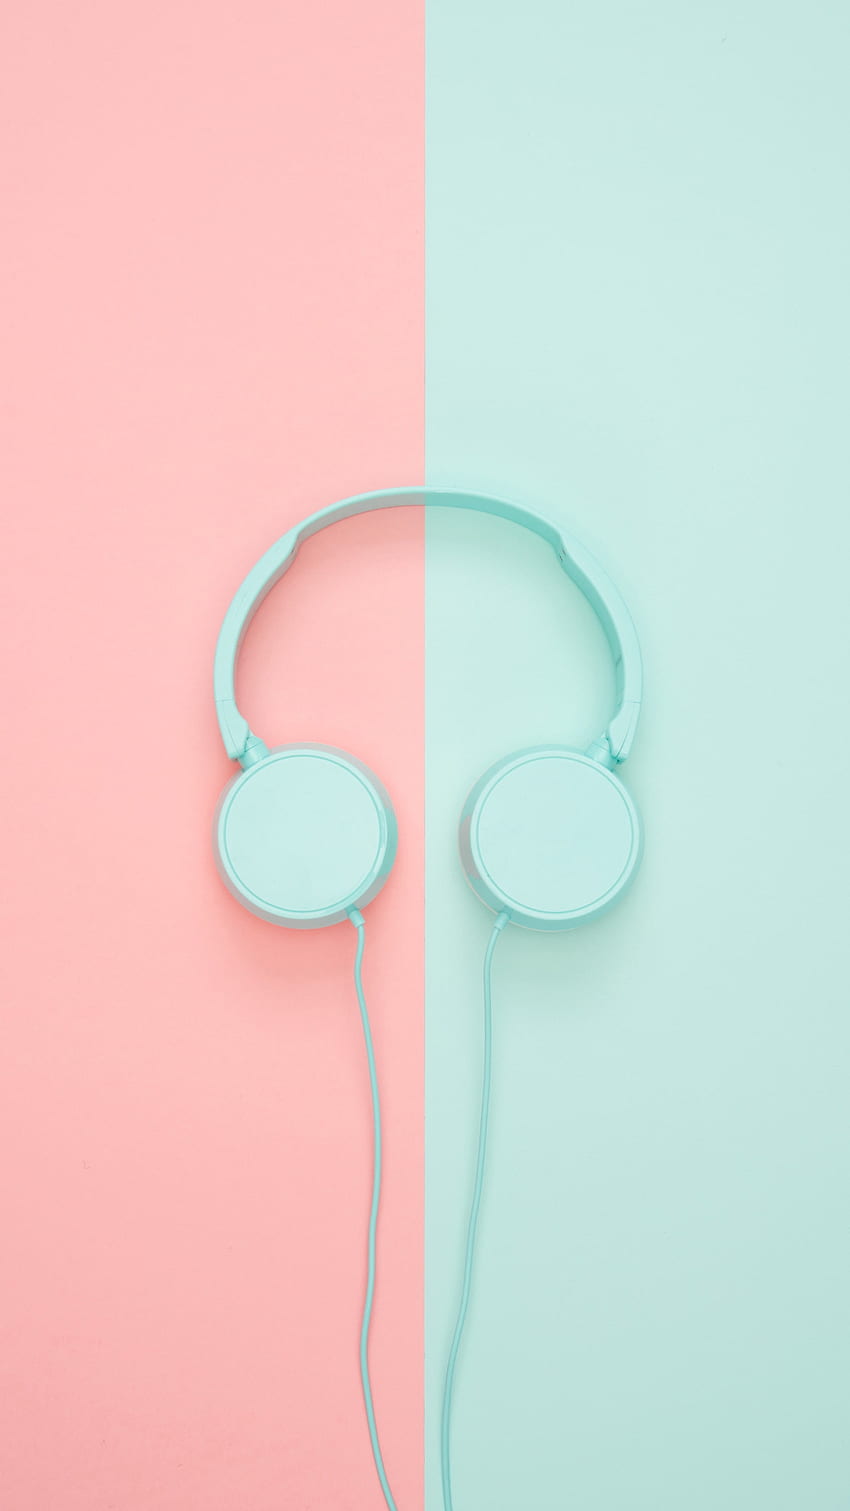 Flawless Pink Headphones 3d Rendered Against A Blush Pink Backdrop  Background Headphone Headset Headphone Mockup Background Image And  Wallpaper for Free Download